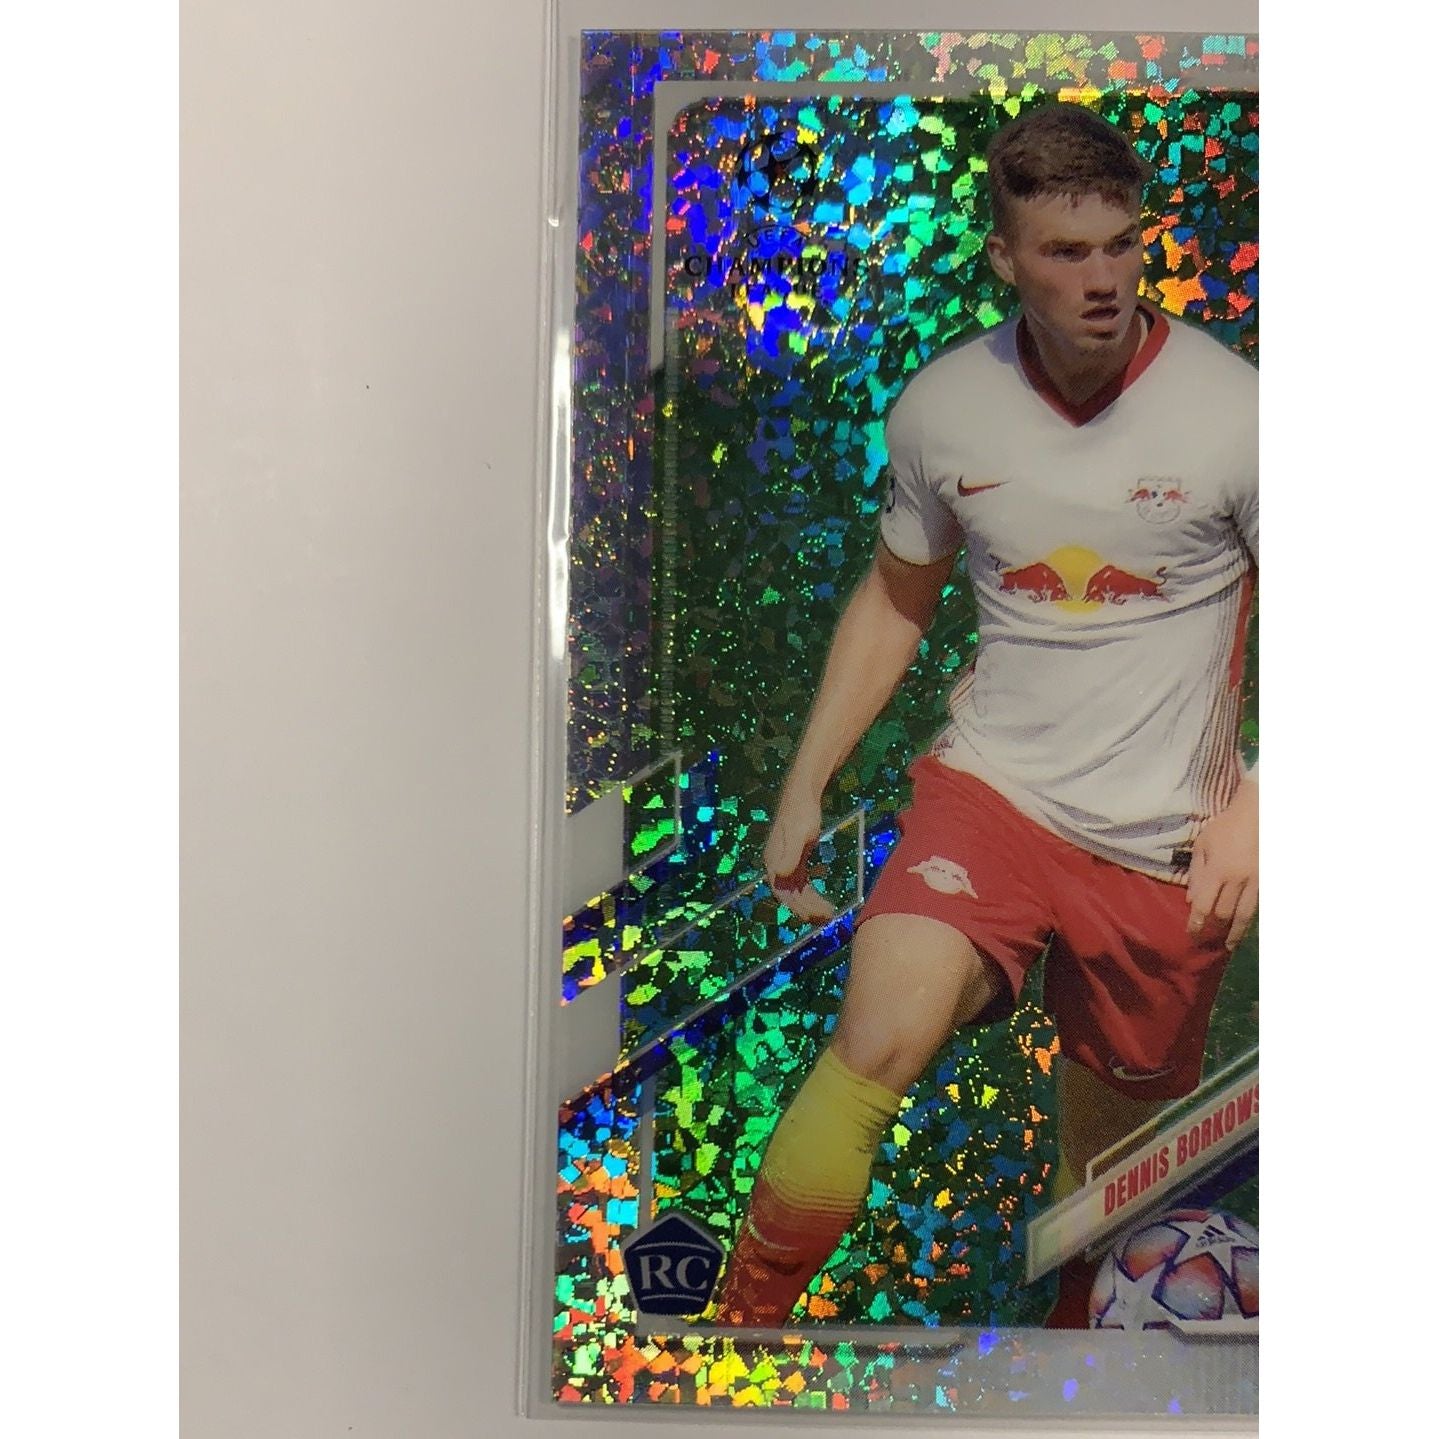  2021 Topps Chrome UEFA Dennis Borkowski RC Speckle Refractor  Local Legends Cards & Collectibles